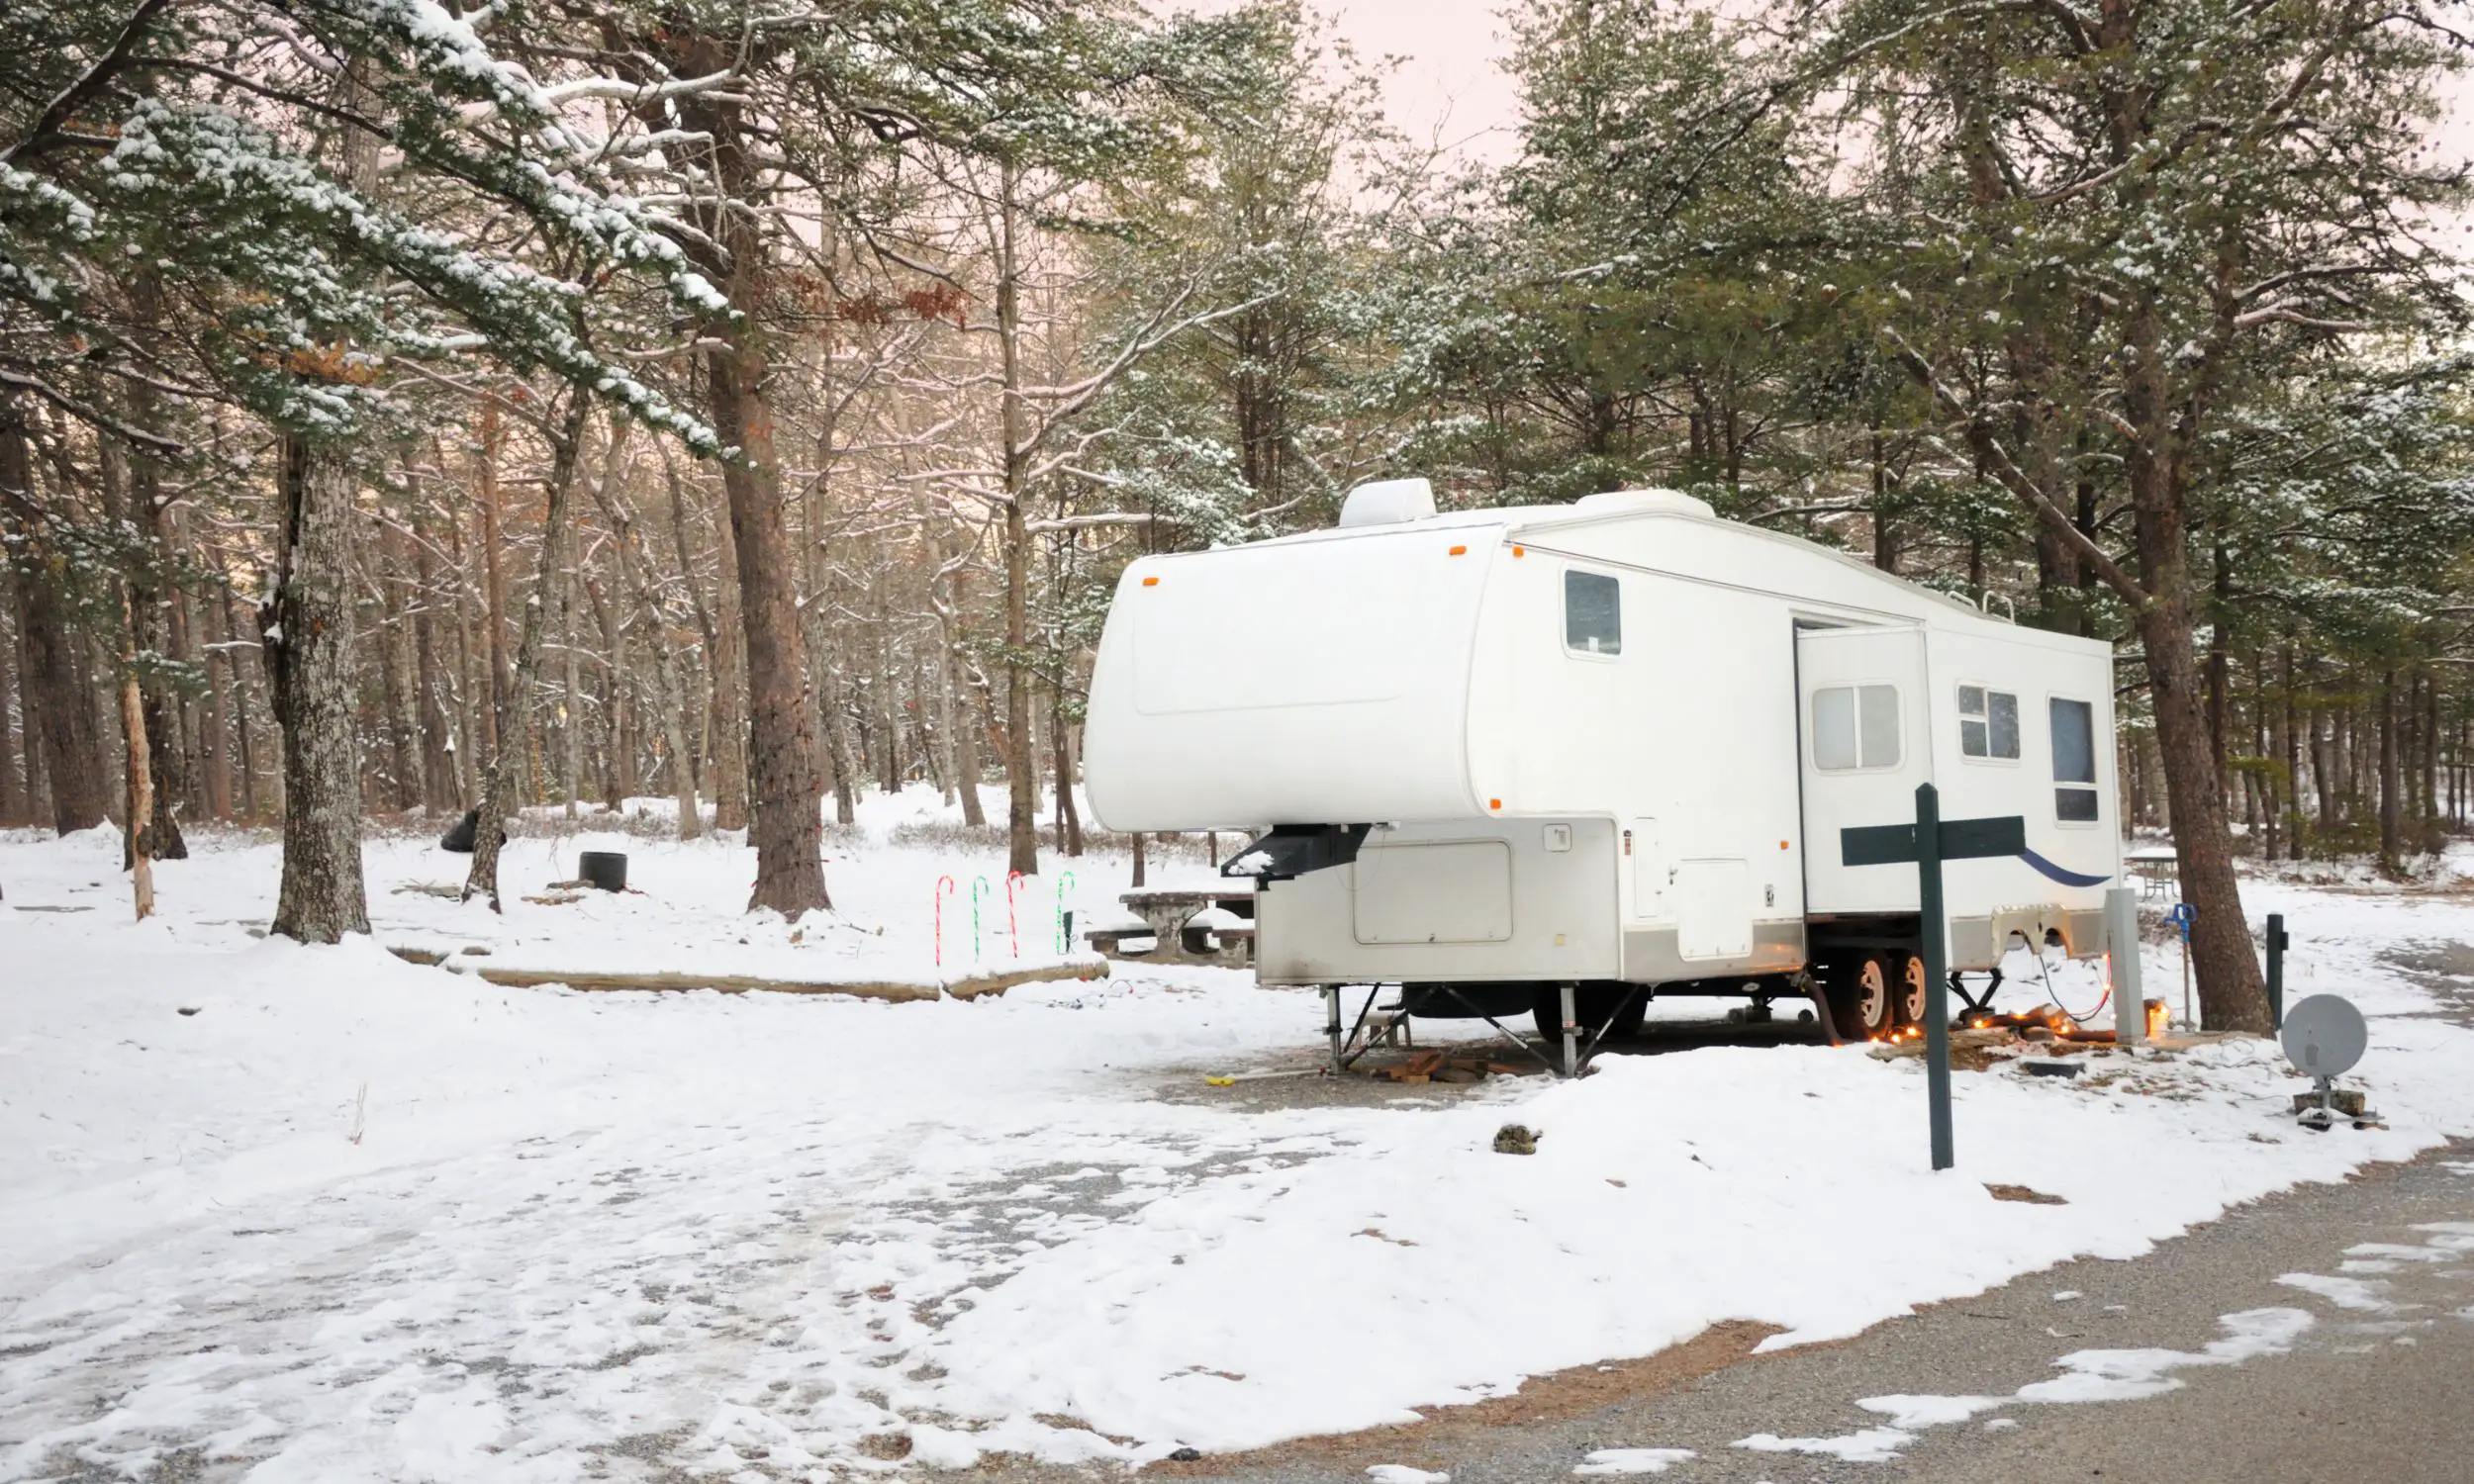 Keeping your RV warm in winter